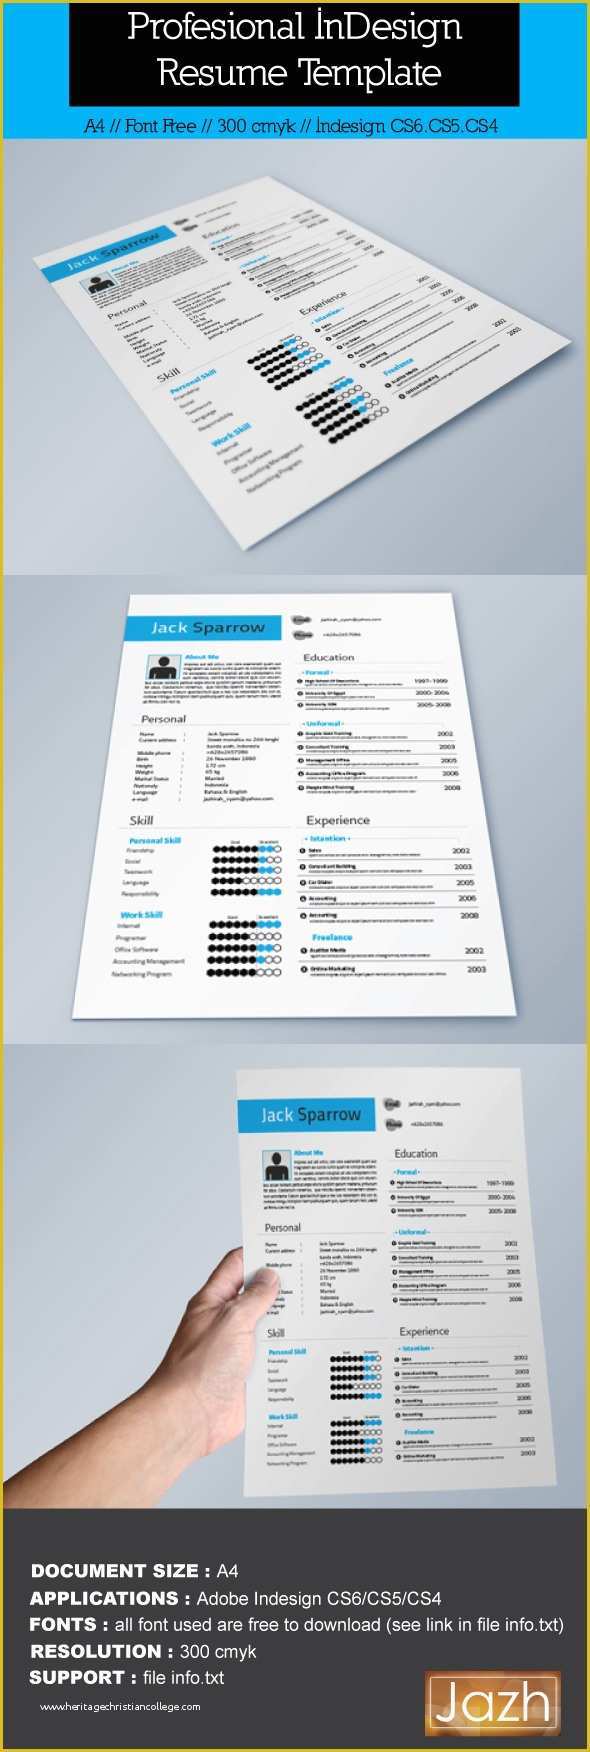 Indesign Resume Template Free Download Of Indesign Resume Template On Behance